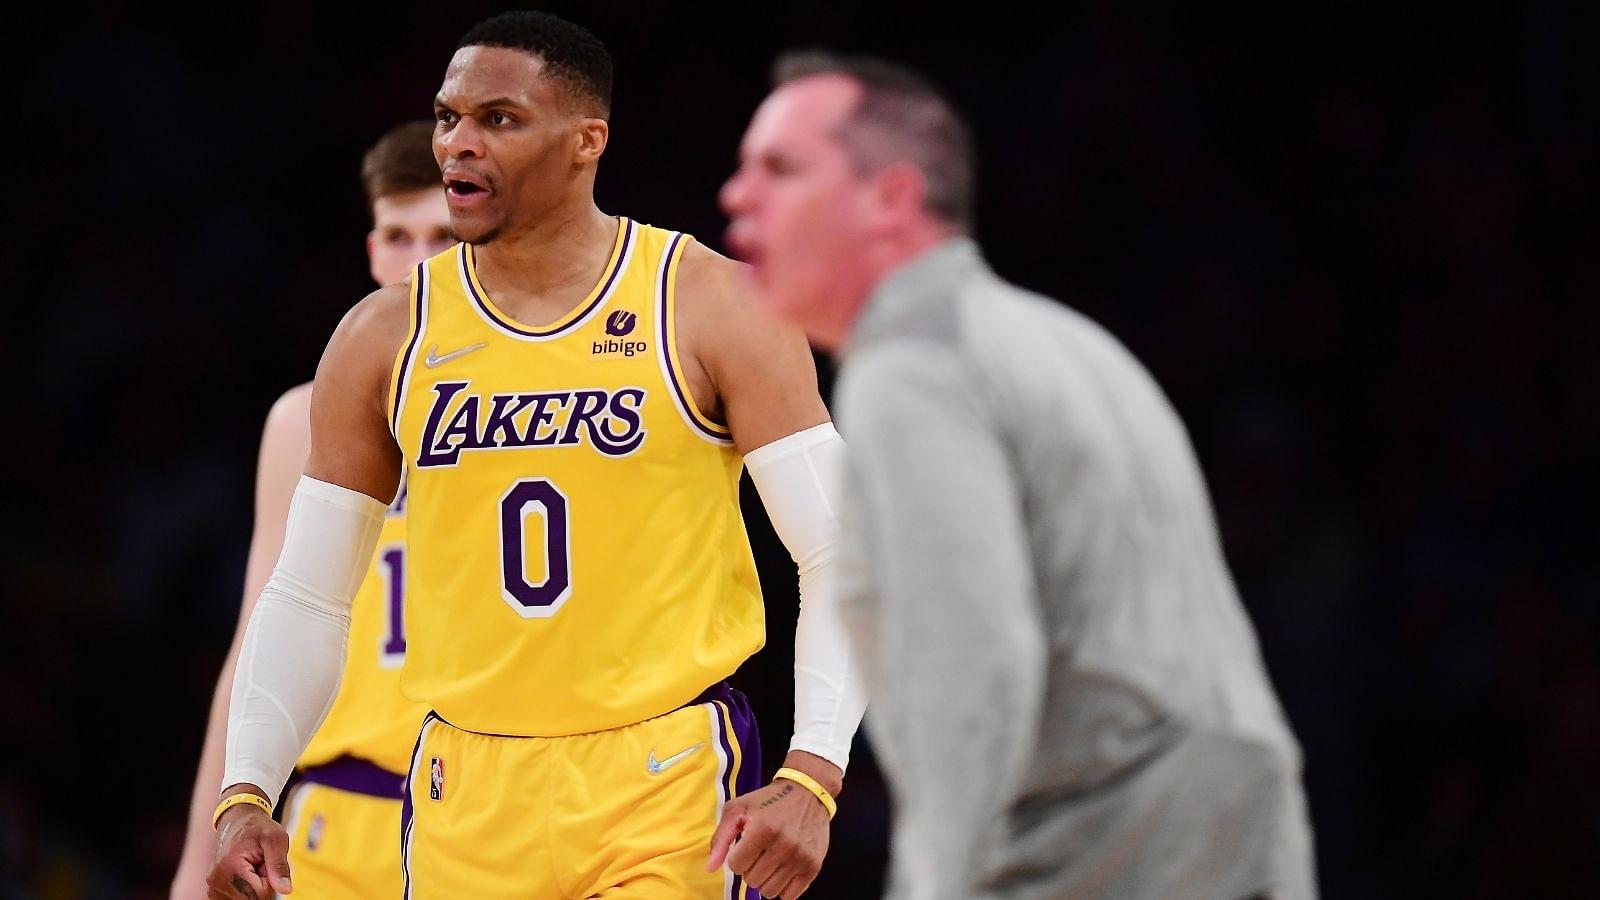 "It’s ‘impossible’ that Russell Westbrook returns to LA next season": NBA correspondent Marc Stein's sources confirm Lakers wouldn't bring their highest-paid player back